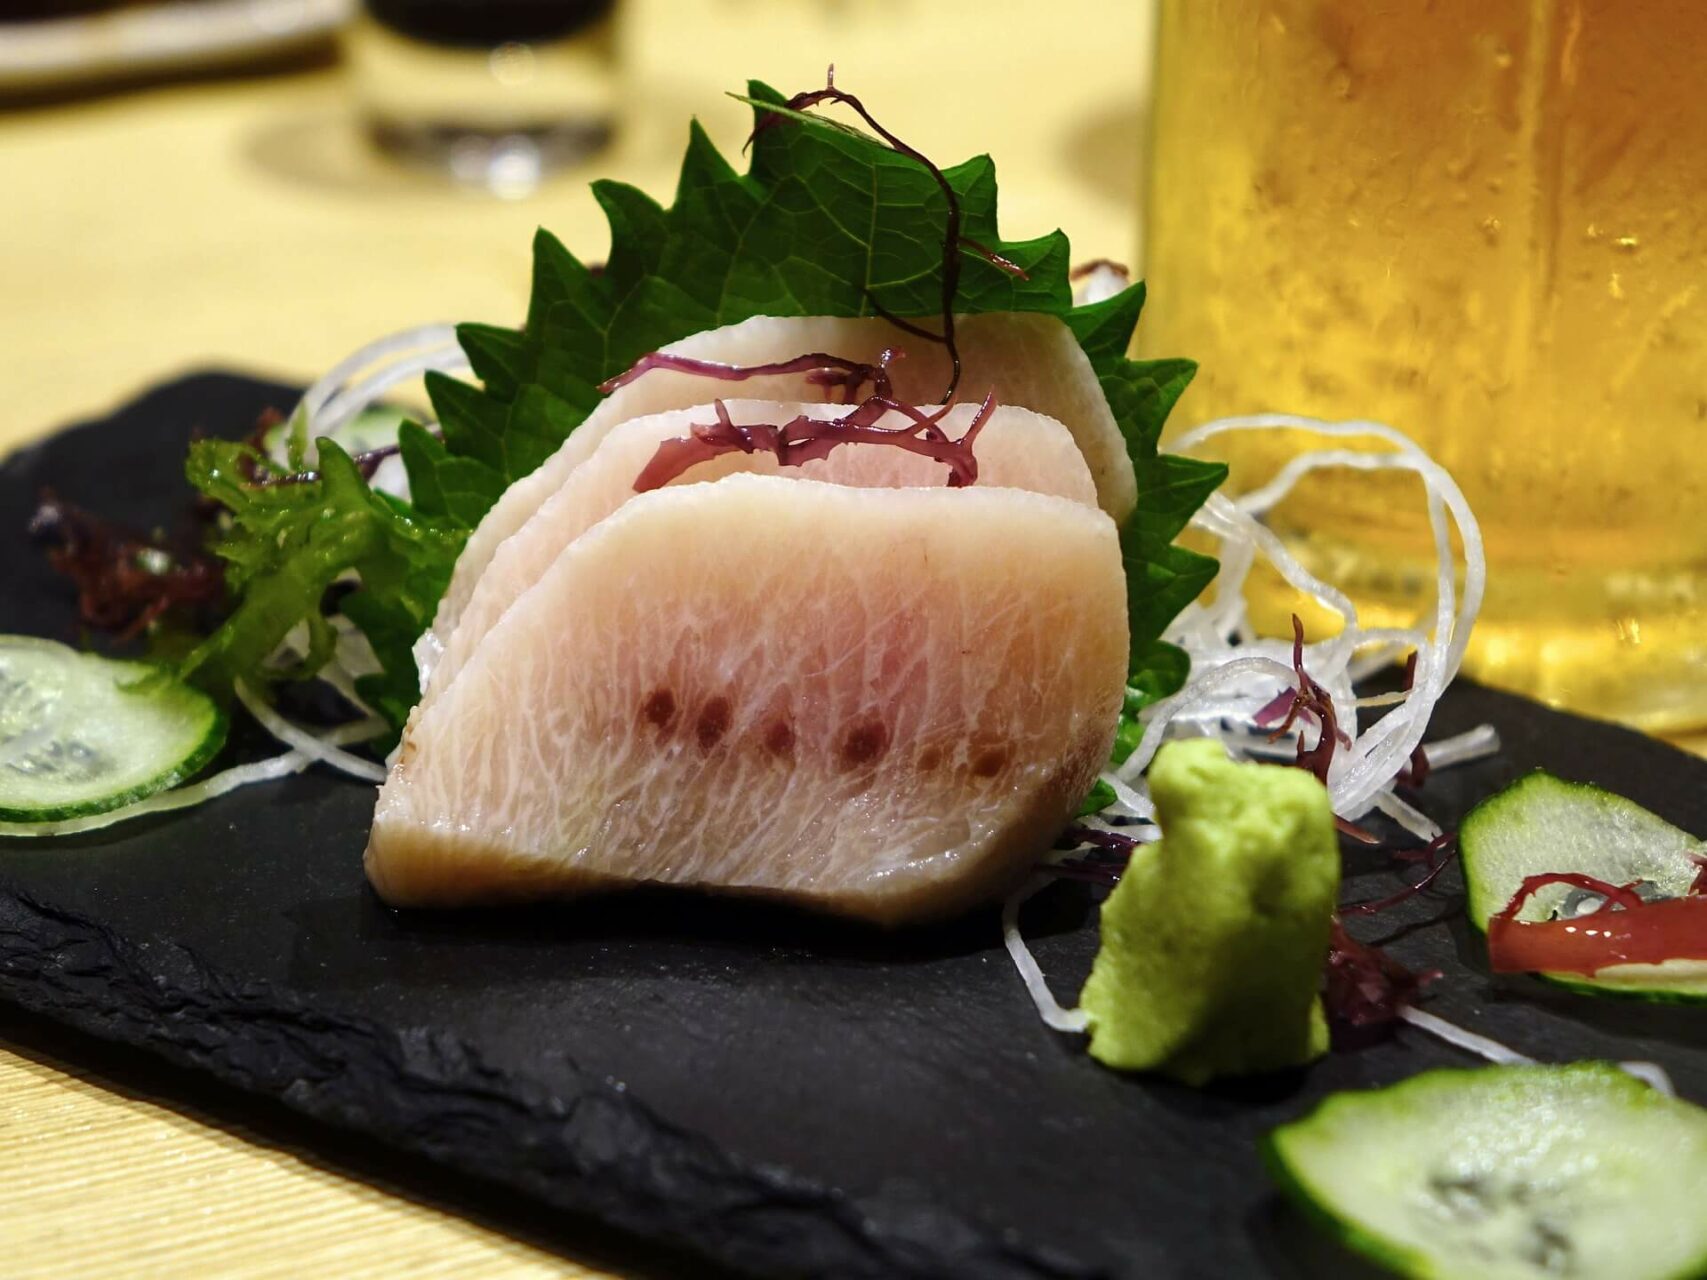 What does Marlin taste like? It has a mild taste and firm texture that is suited for Sashimi